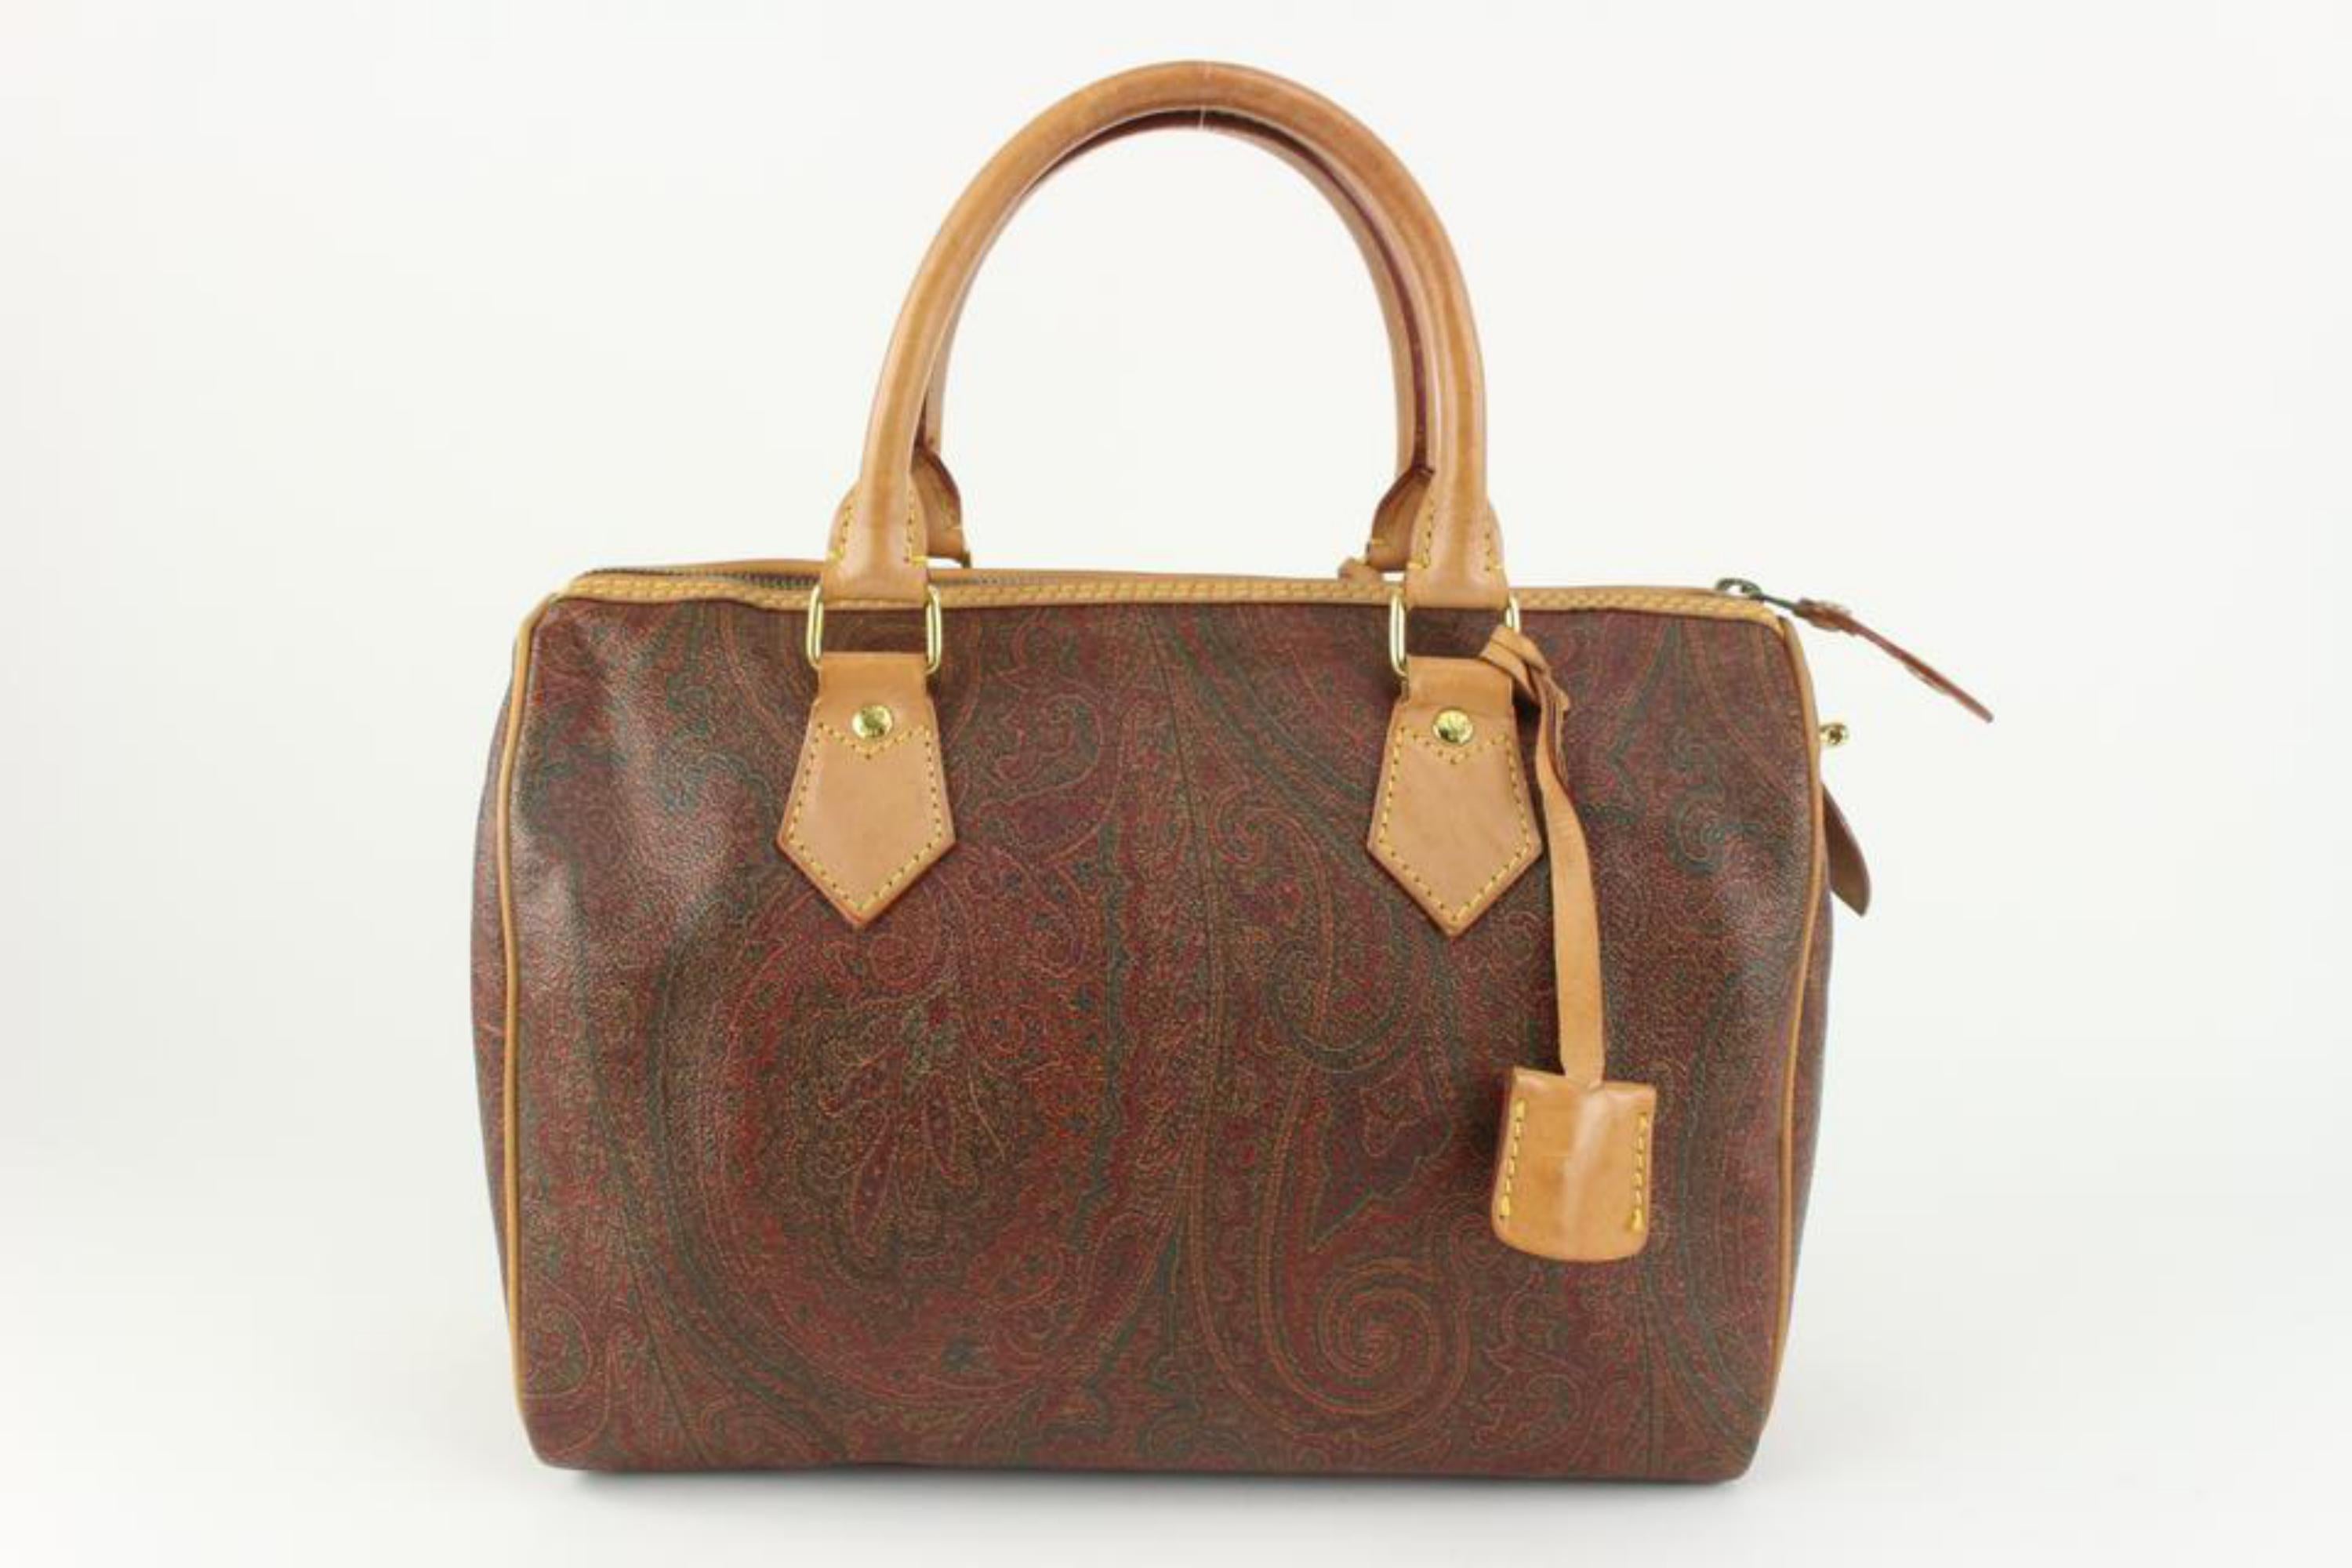 Etro Bordeaux Paisley Boston Doctor's Bag 127et14 In Good Condition For Sale In Dix hills, NY